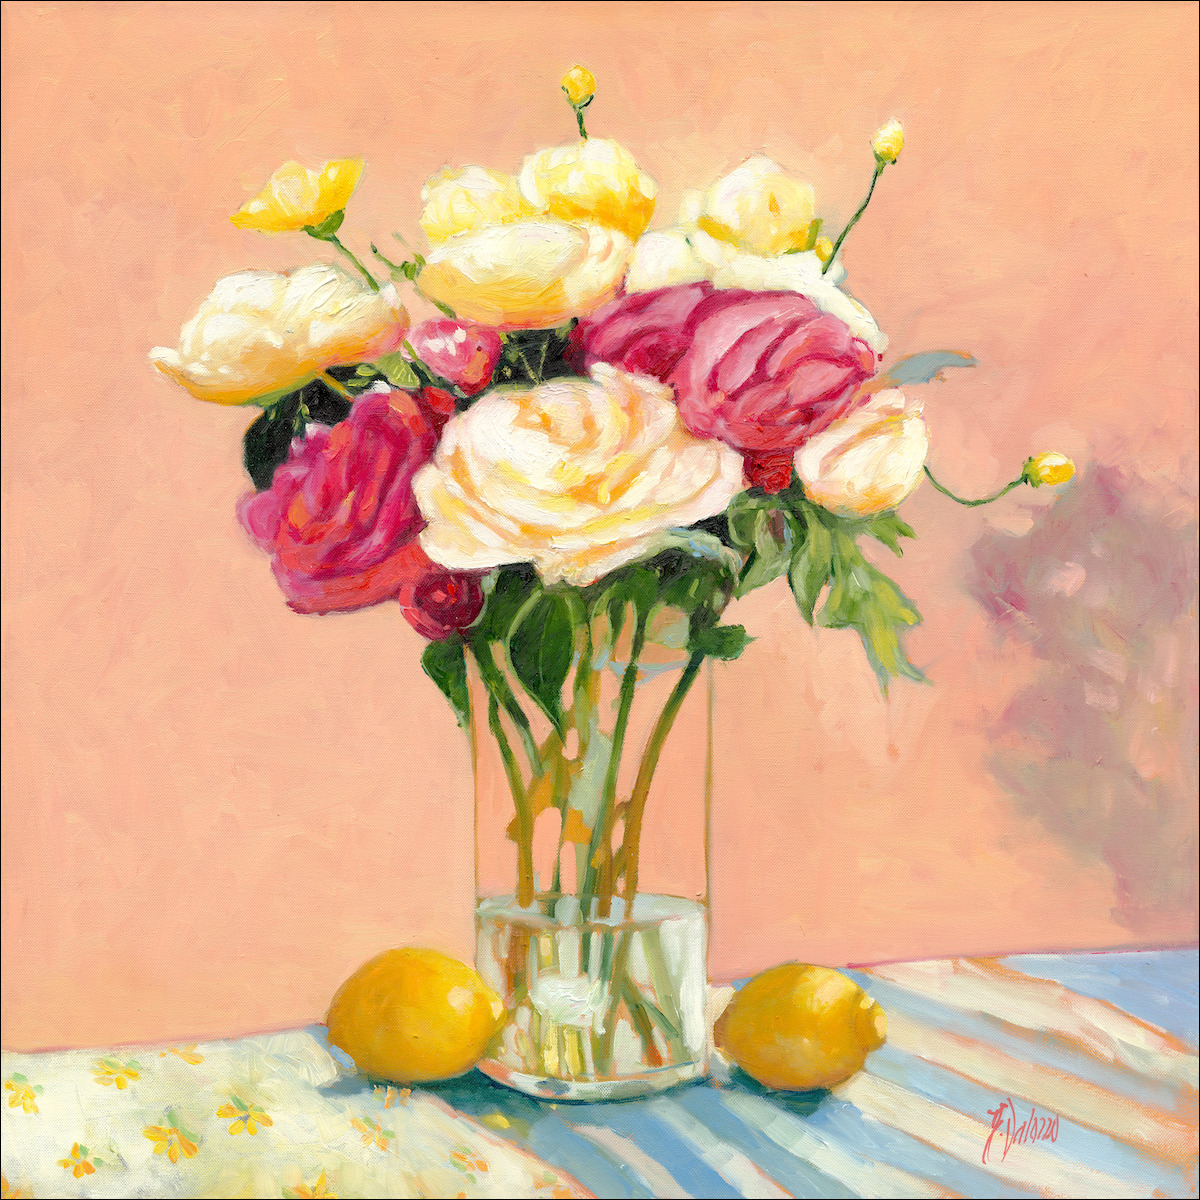 Floral Still Life Painting "Peonies from My Garden" by Judith Dalozzo